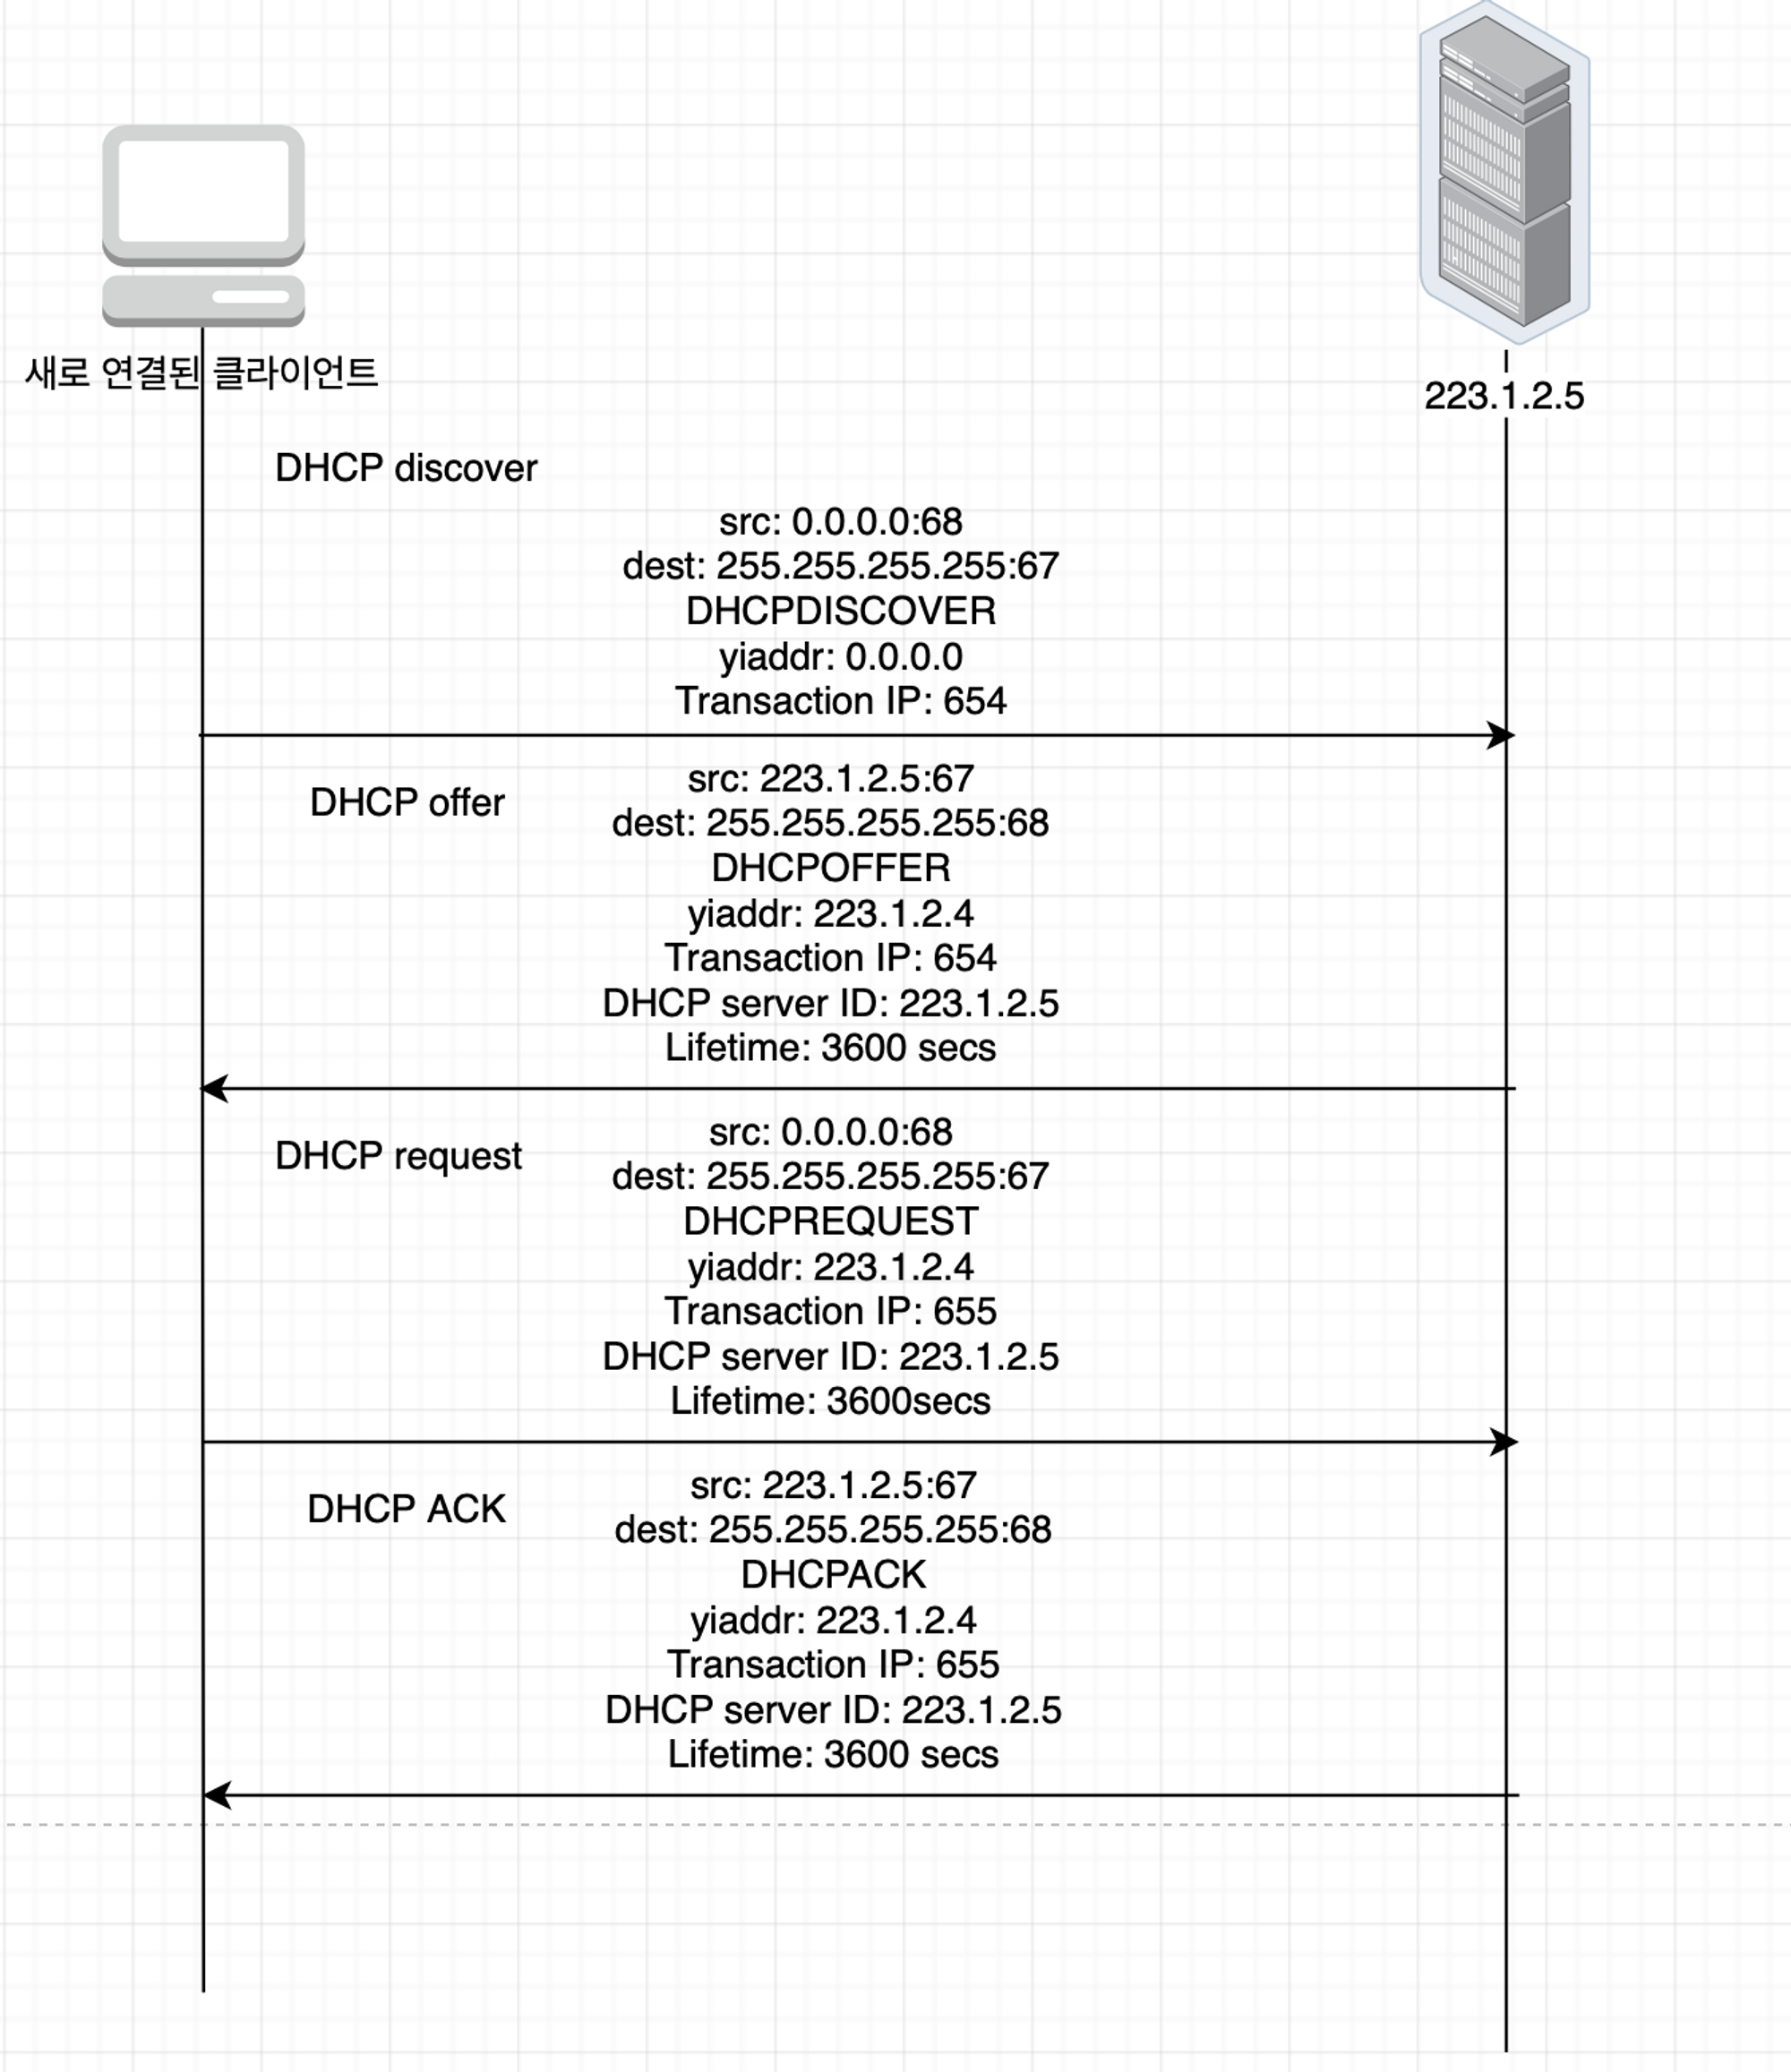 dhcp location